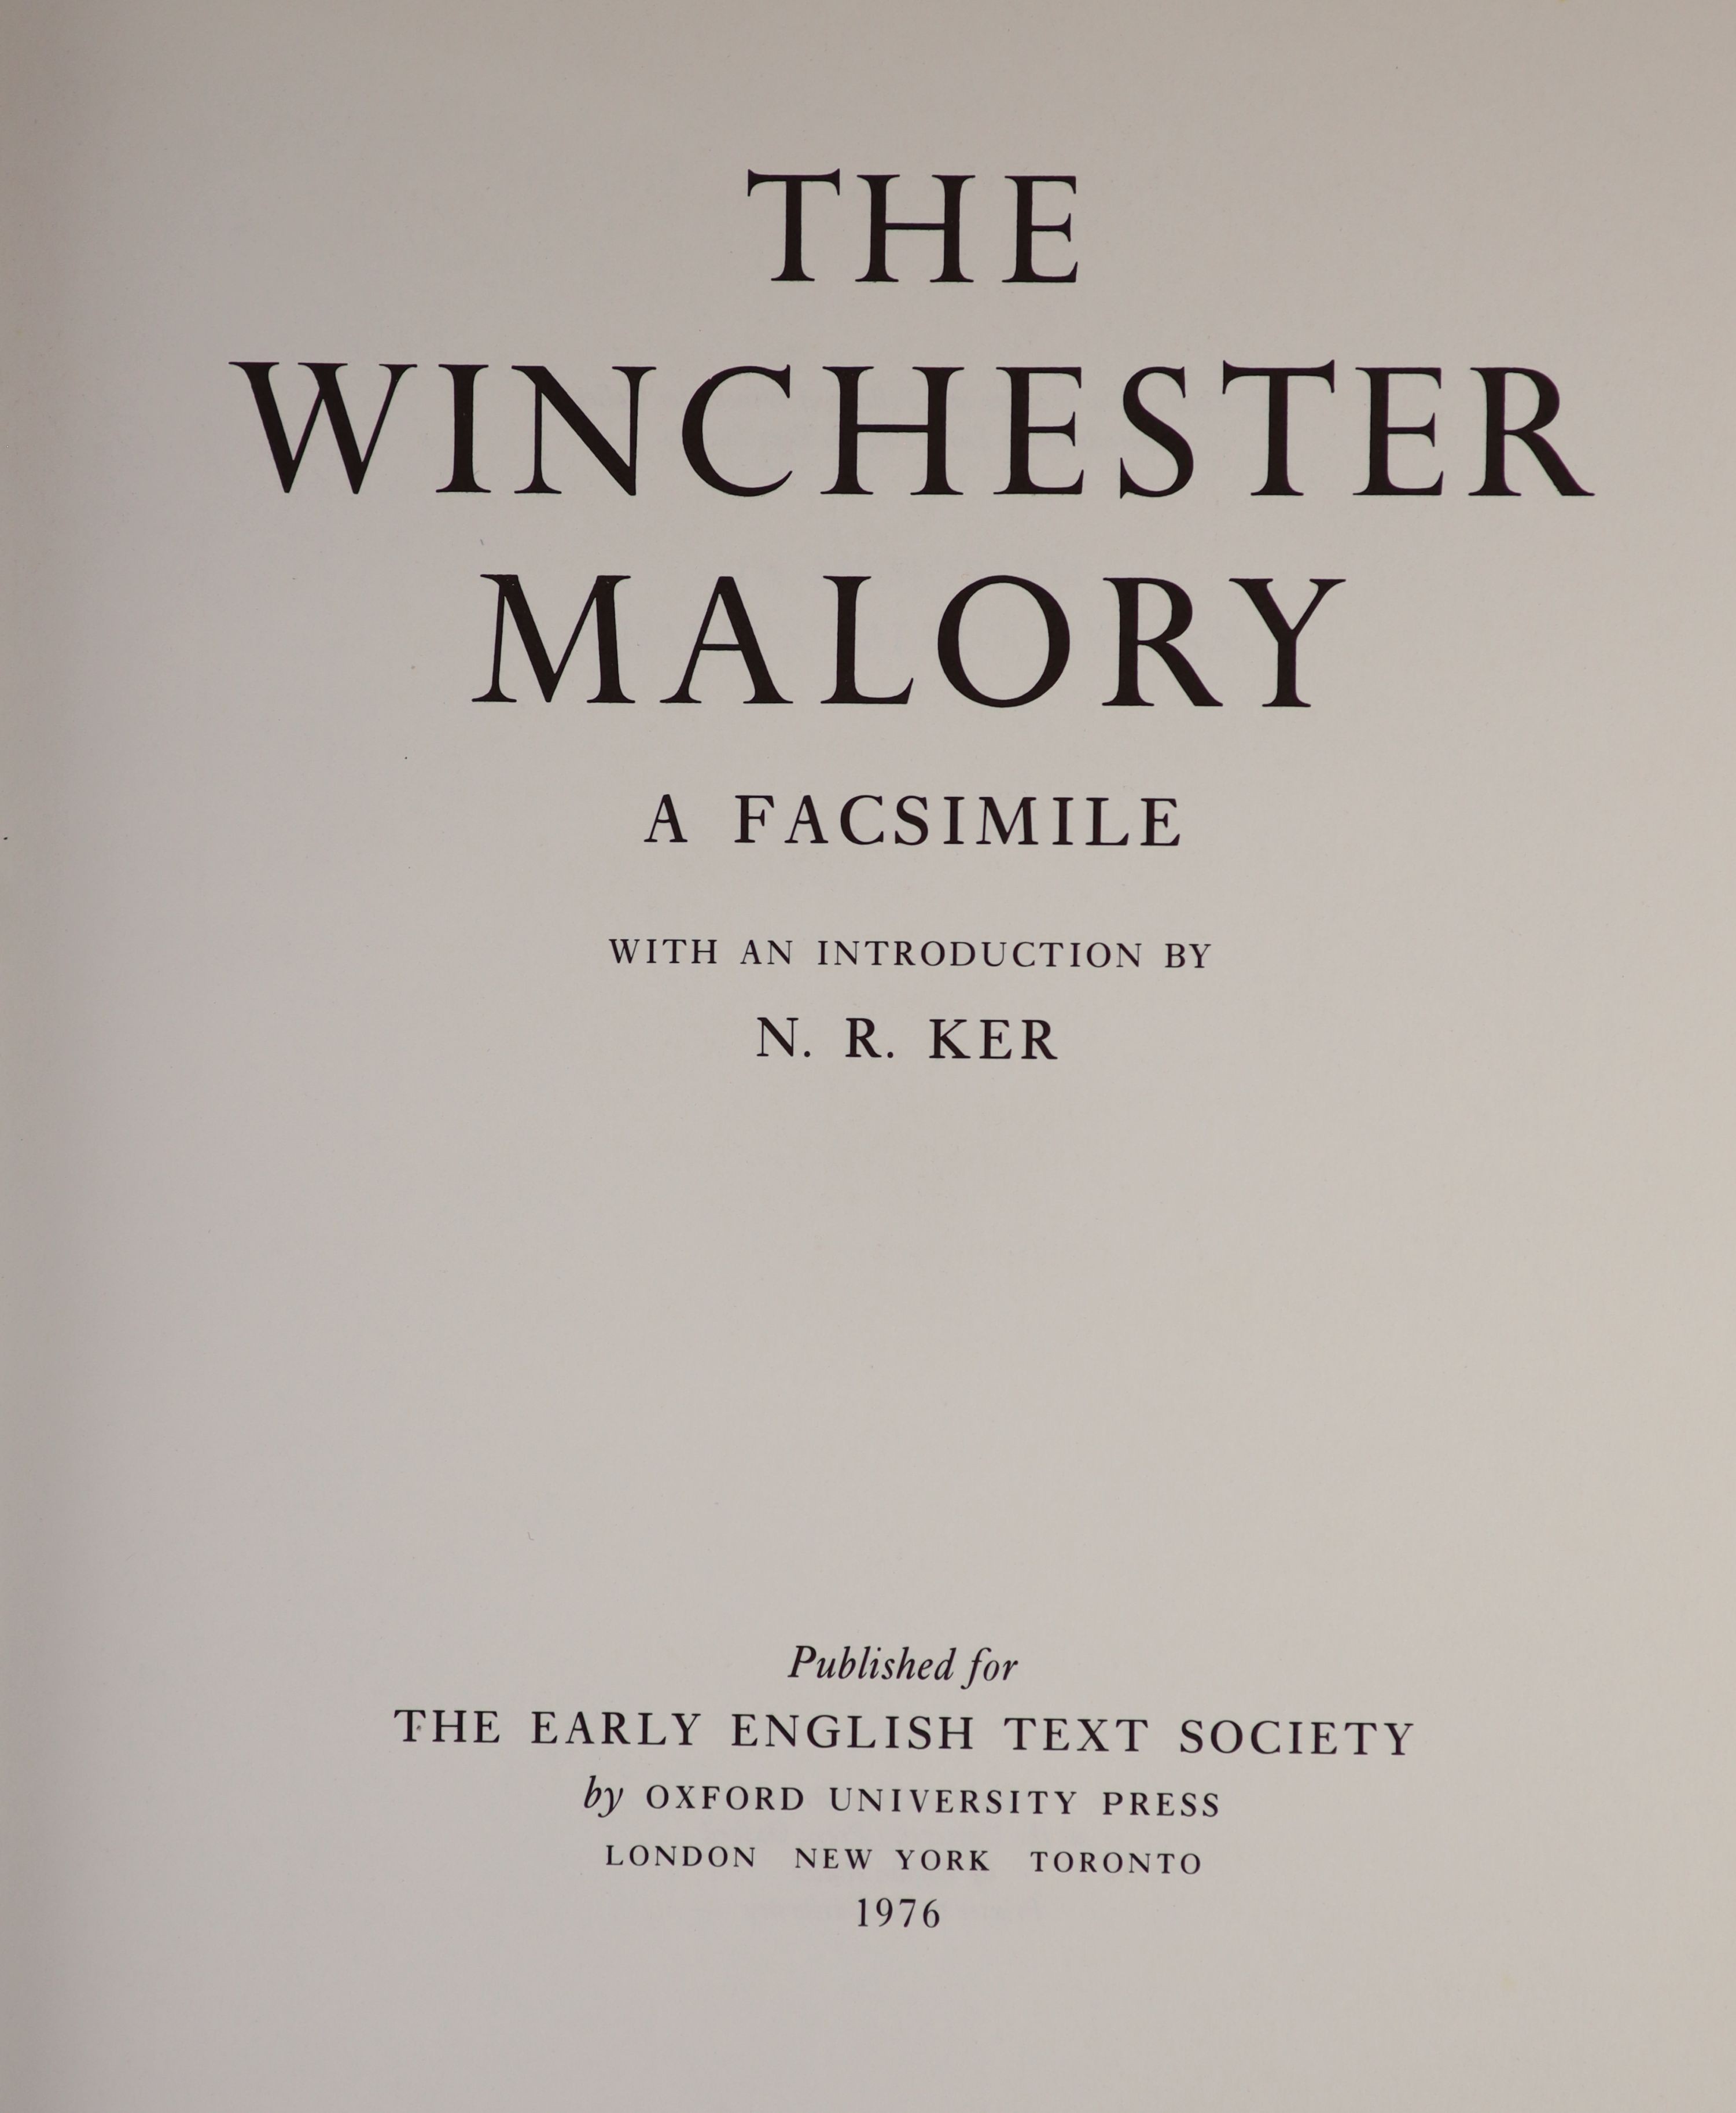 (Malory, Sir Thomas - Le Morte D'Arthur) The Winchester Malory: a facsimile. With an introduction by N.R. Ker. gilt buckram, thick folio, Early English Text Society, 1976; together with: Yeats - Edwards, Paul - Sir Thoma